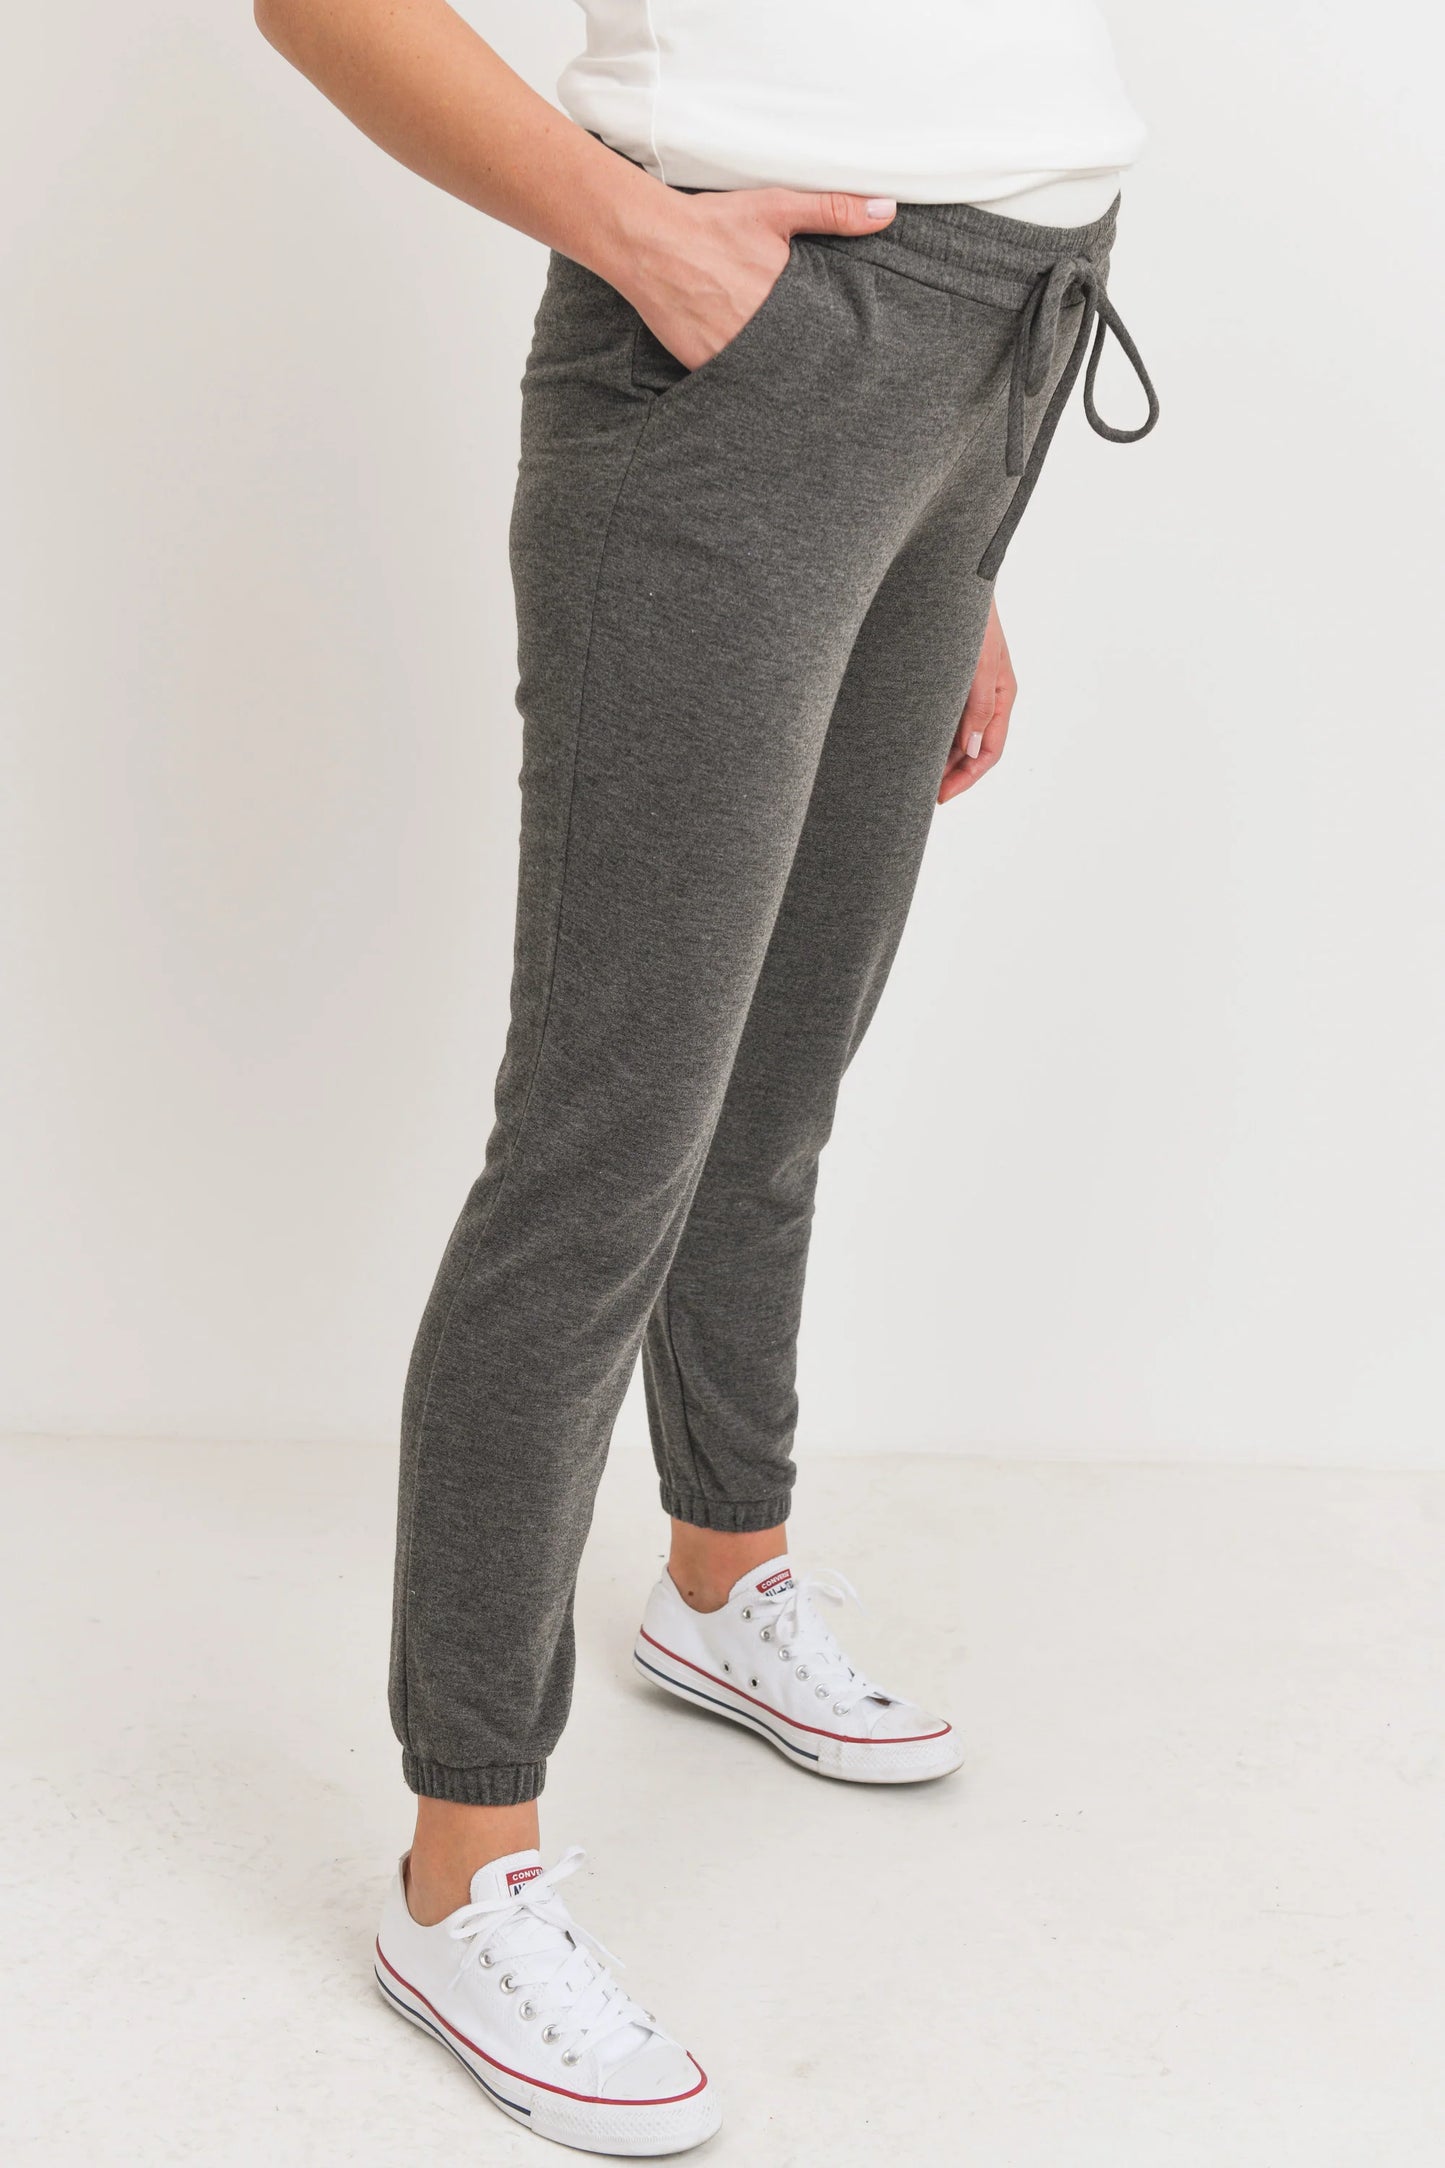 Two Toned Brushed Terry Maternity Sweatpants